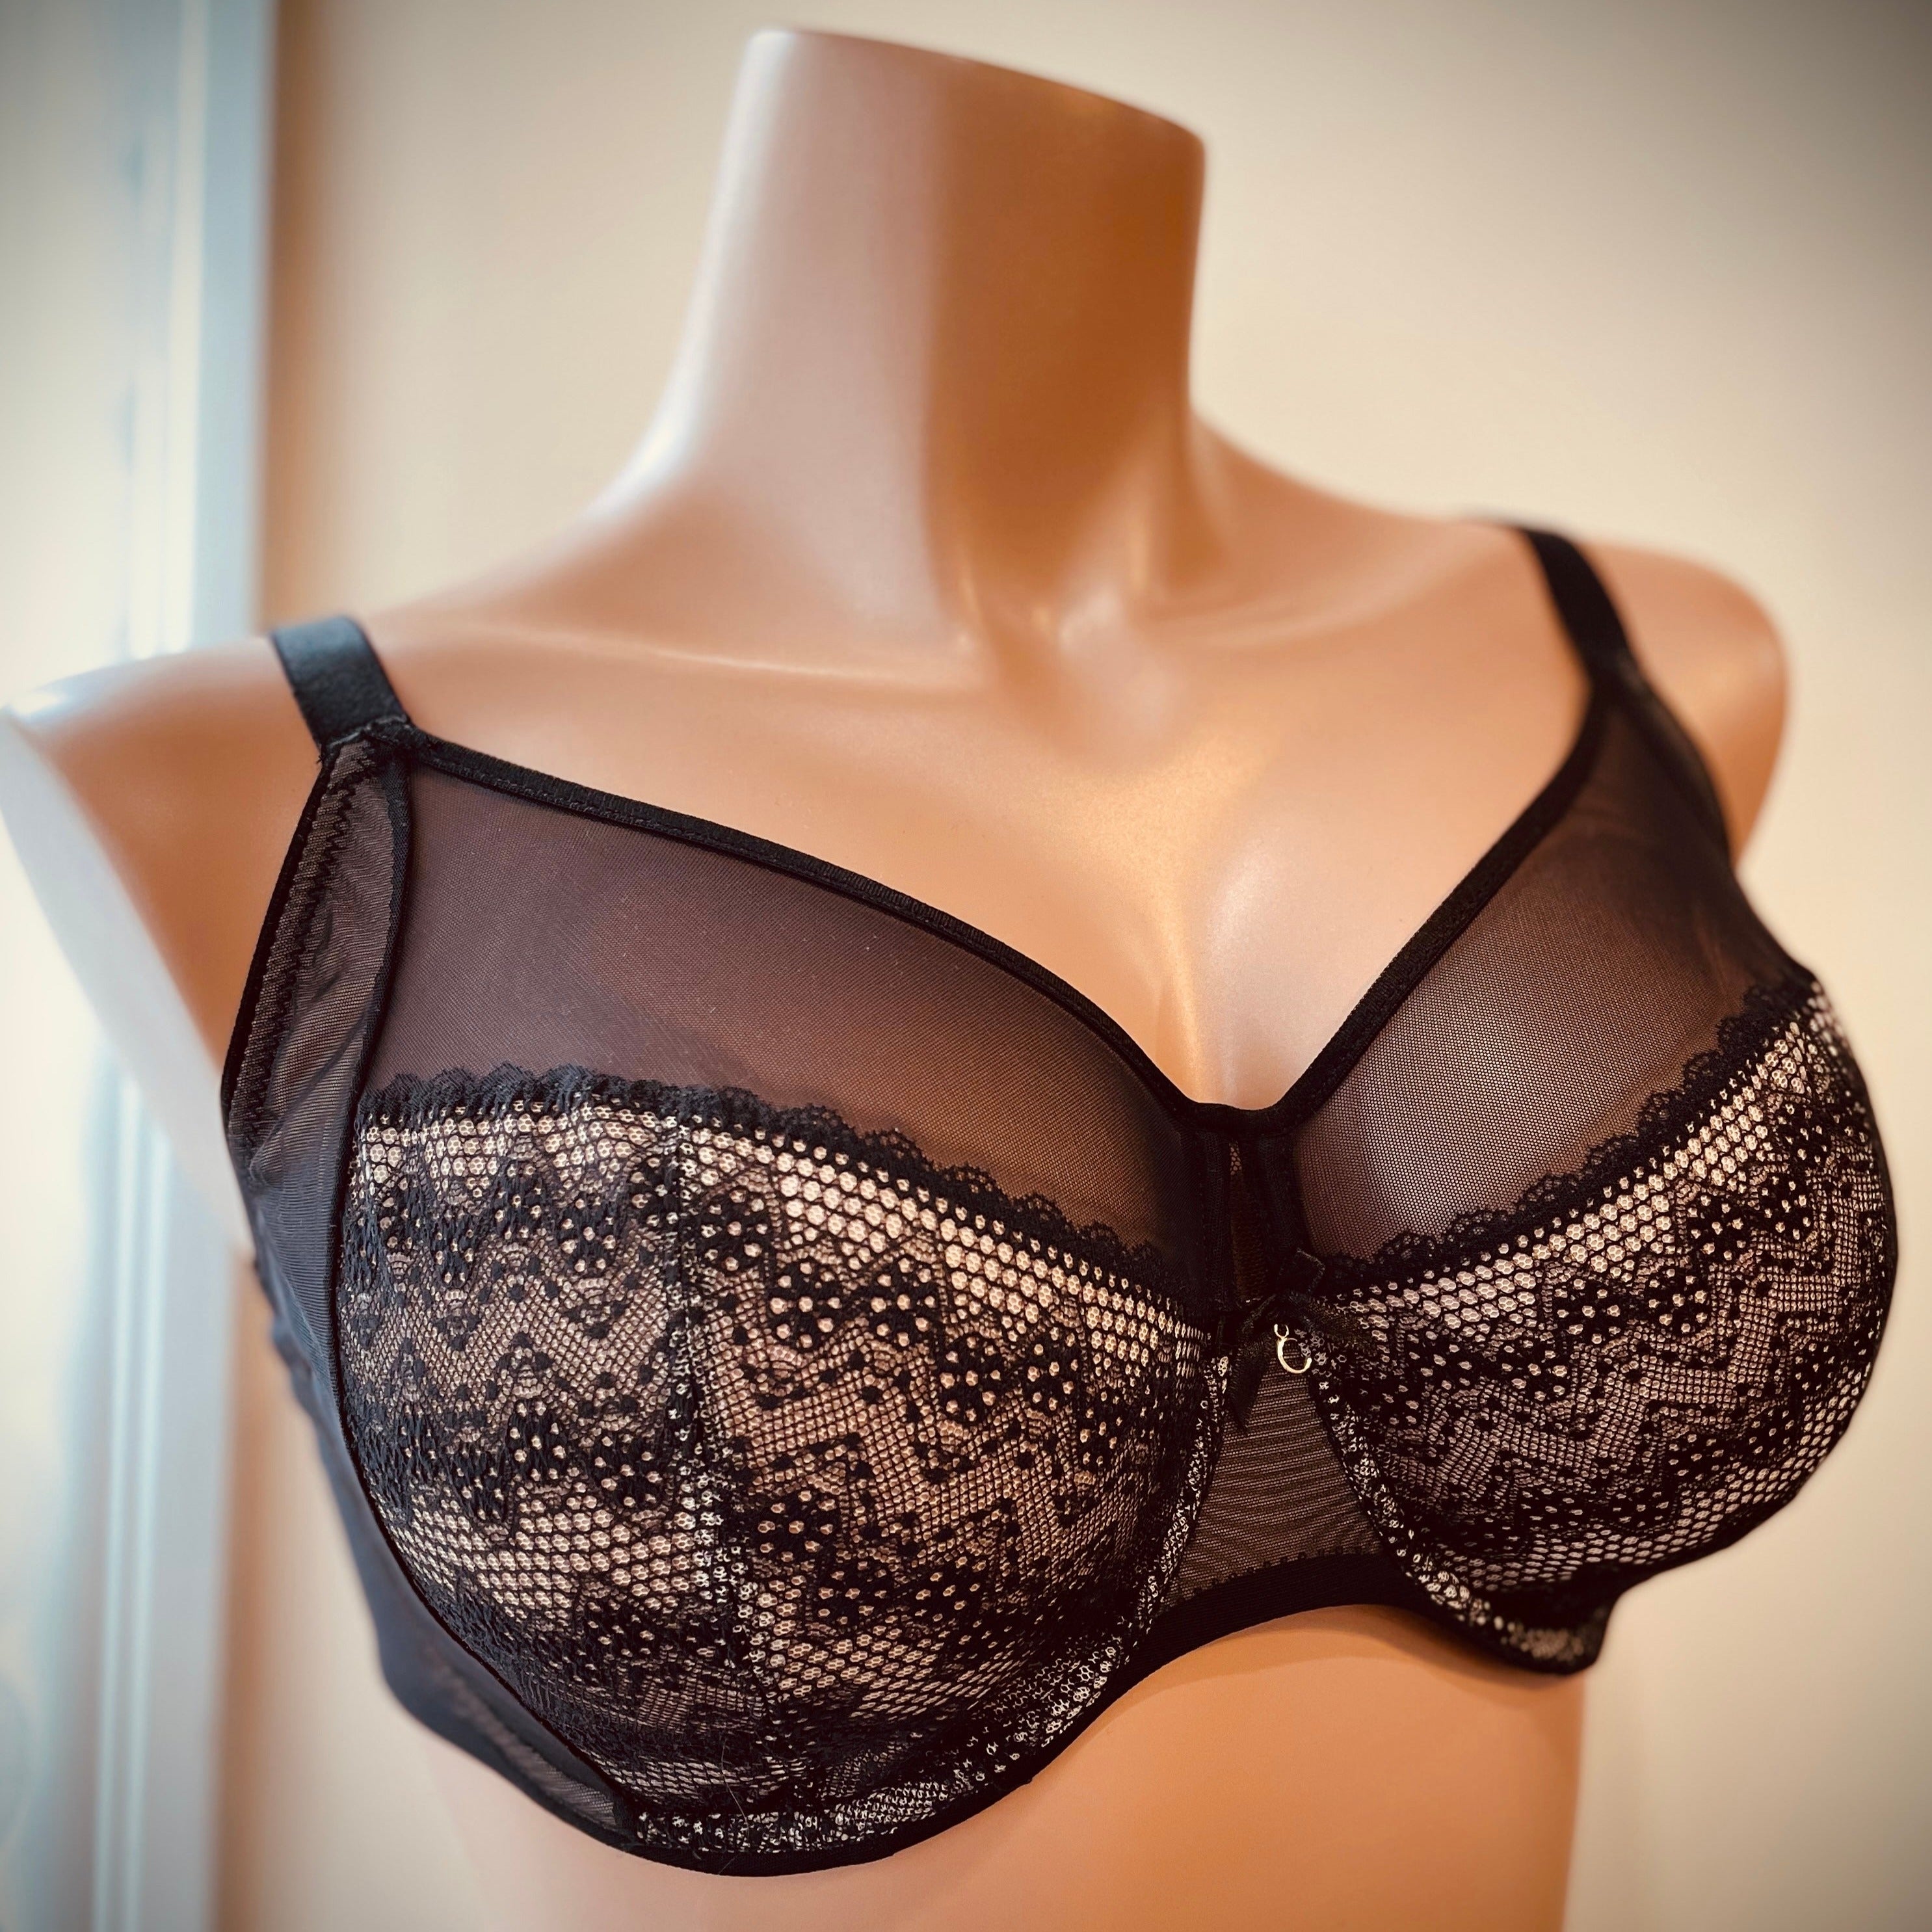 A Chantelle Favorite, the Révèle Moi Perfect Fit Underwire Bra is the pillar of everyday comfort and support. Sheer mesh panels at the top of the cups helps contain the breast, while creating the look of less bra on the body. The vertical and angled seams on the cups provide maximum lift, while centering the breast tissue, creating the look of a longer, thinner waist.